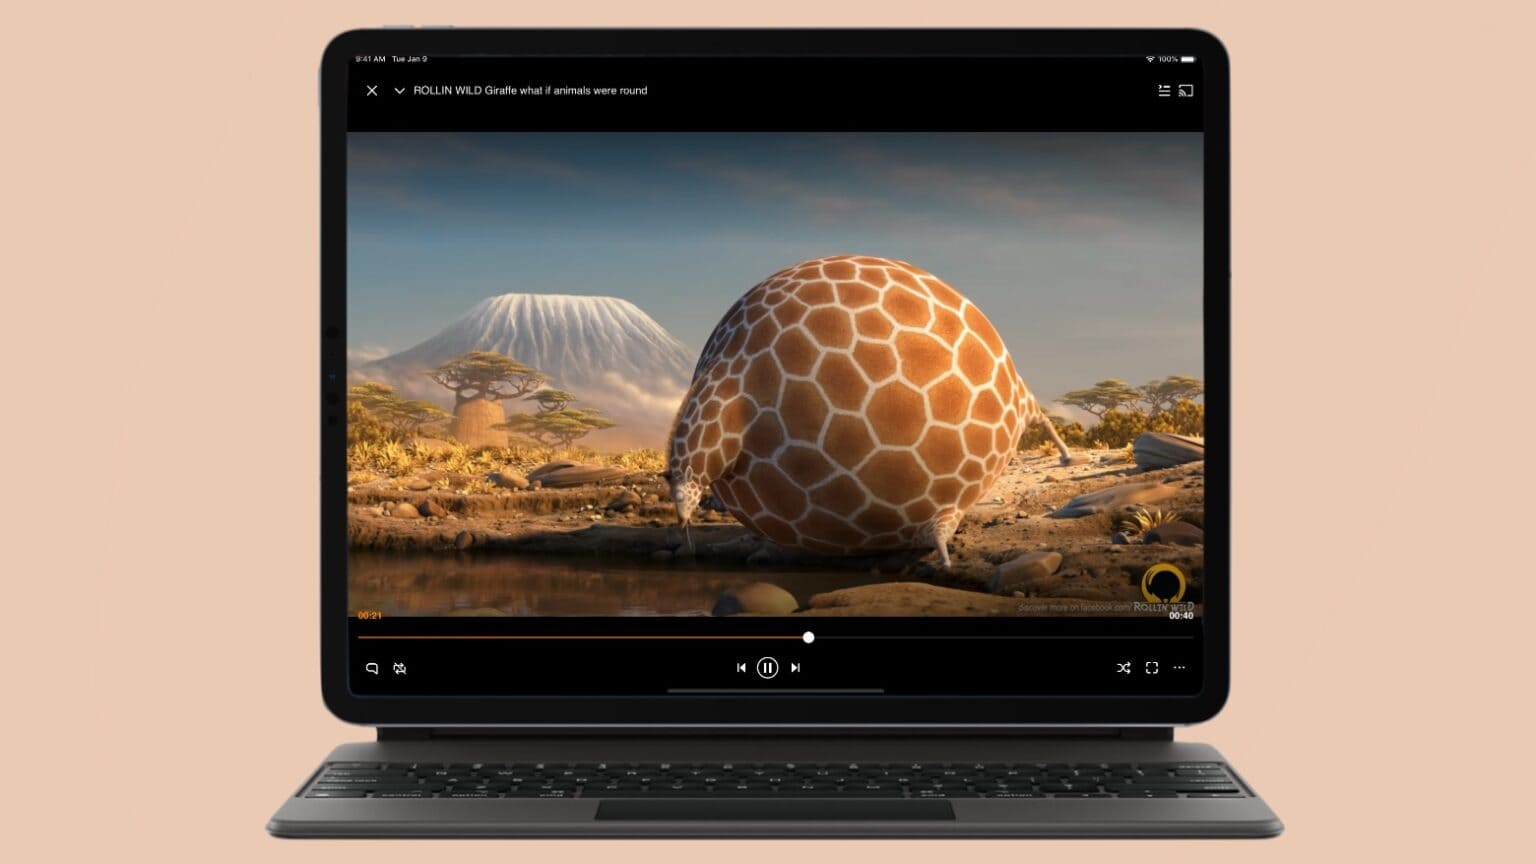 VLC Media Player update is packed with useful new features